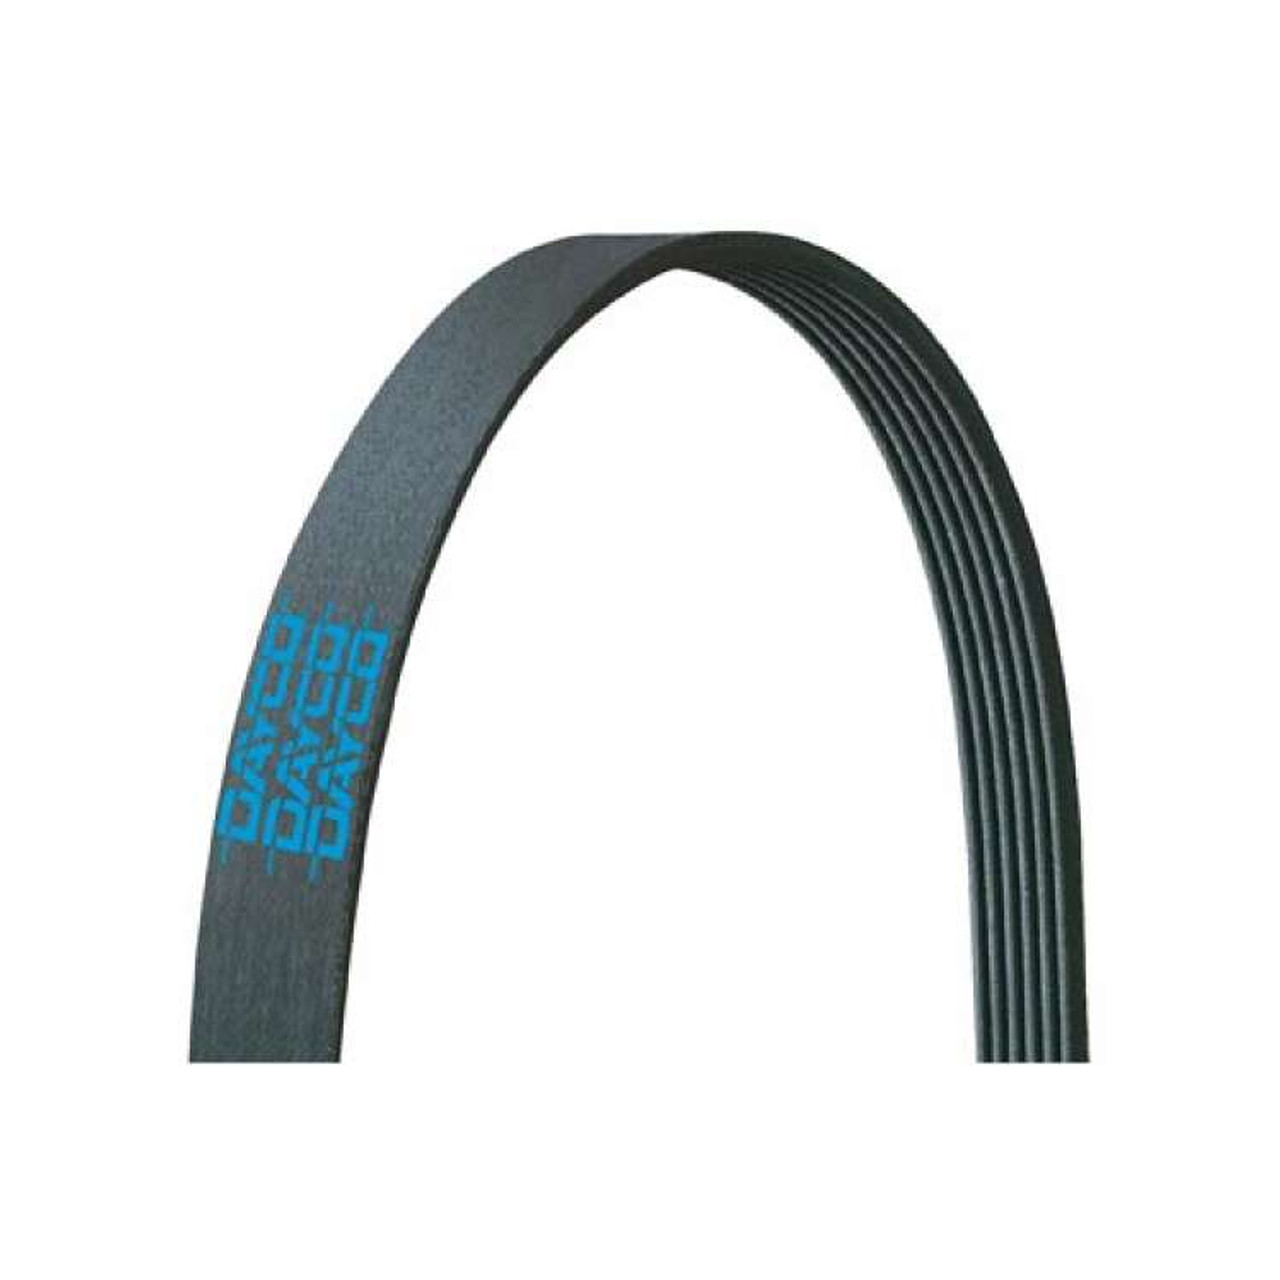 Dayco Poly Rib Serpentine Belt- Air Conditioning